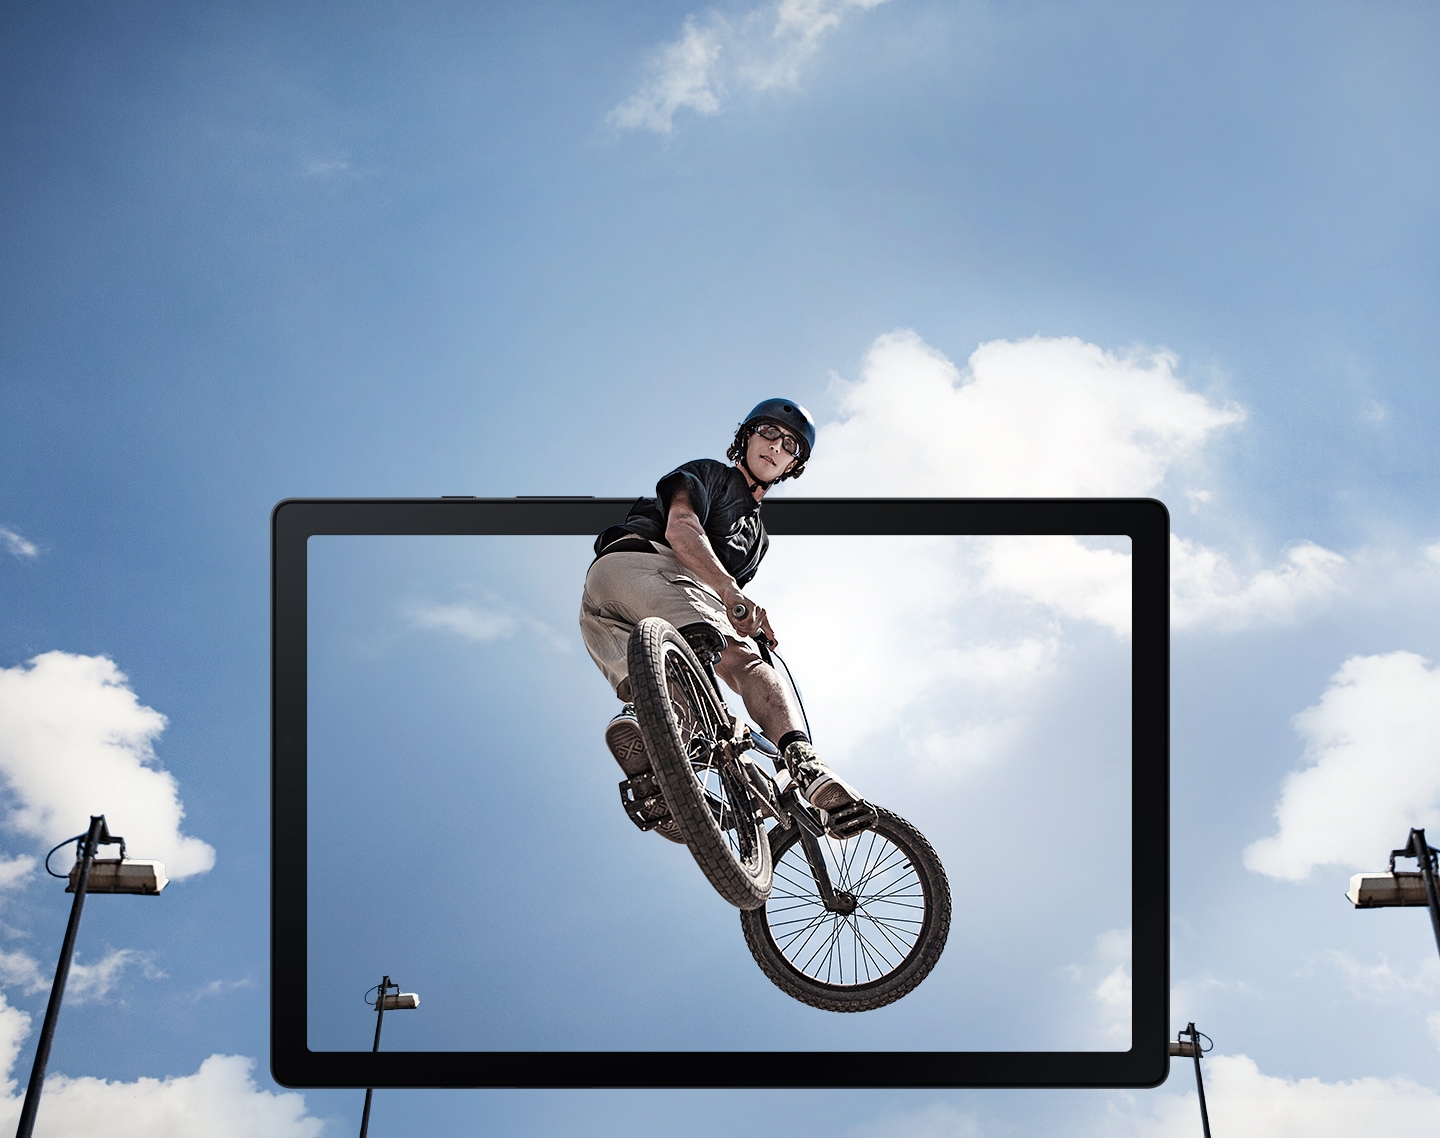 Samsung Tab A8 - A man doing a jump on a BMX bicycle in the air is shown popping out of a tablet screen.